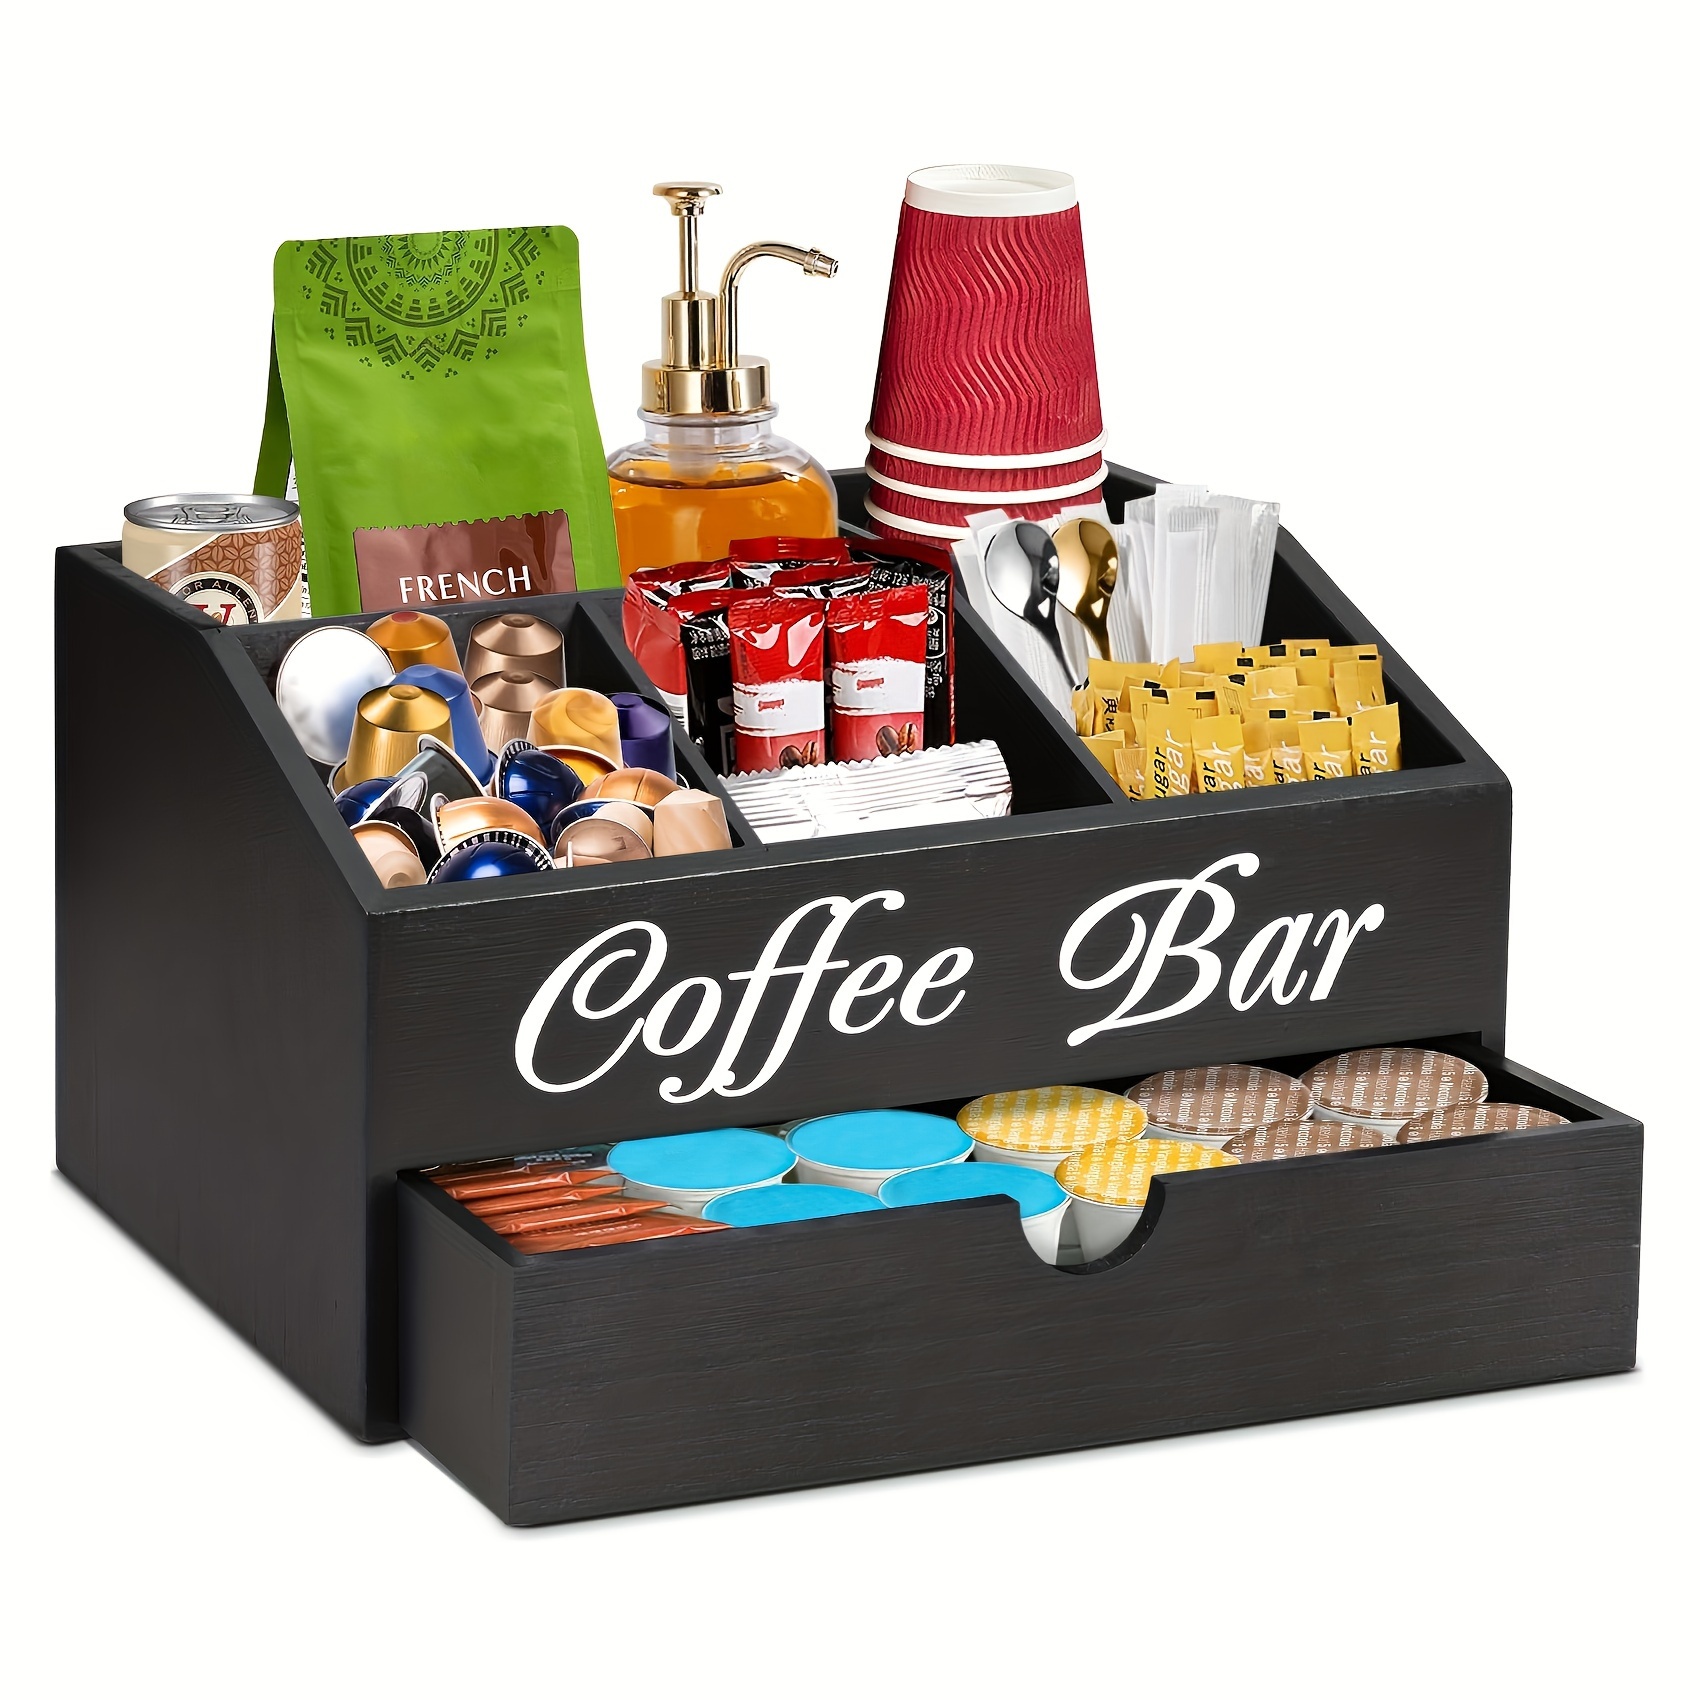 

Rustic Wooden Coffee Bar Organizer With Drawer - Spacious Countertop Storage For Pods, Tea & Condiments - Ideal For Home, Office, Or Dorm Decor